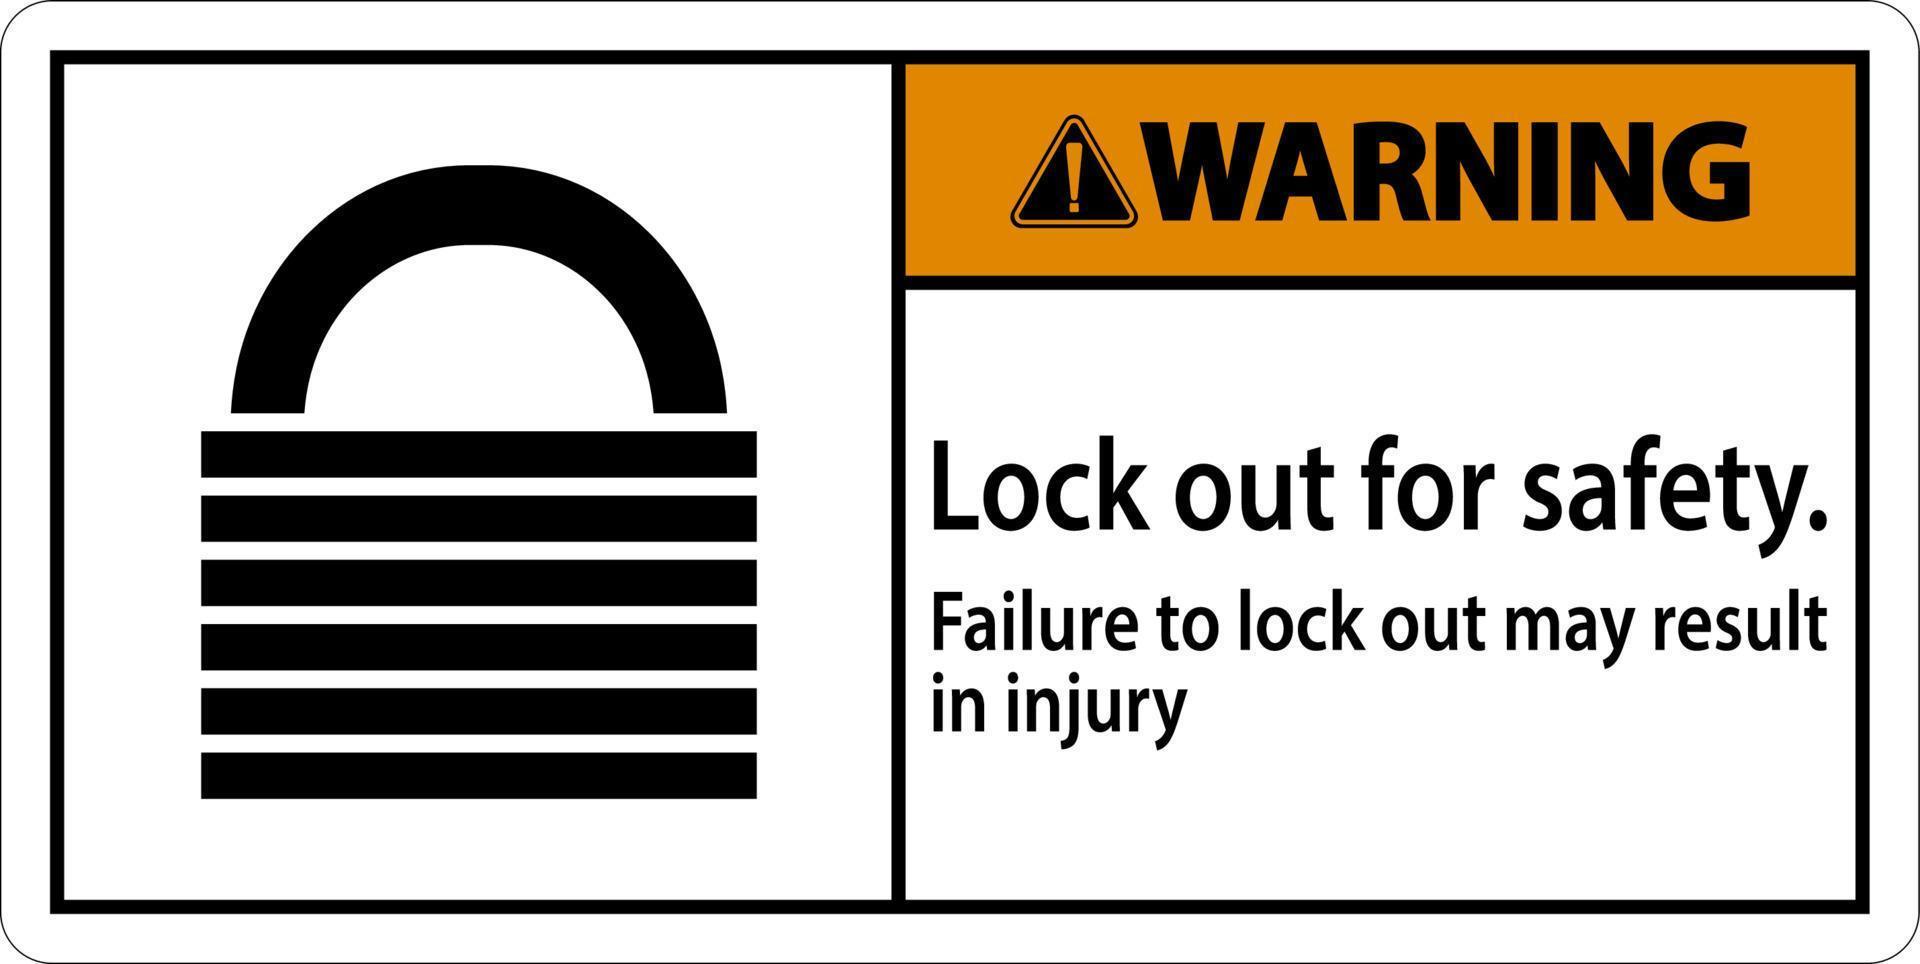 Warning Lock Out For Safety. Failure To Lock Out May Result In Injury Sign vector